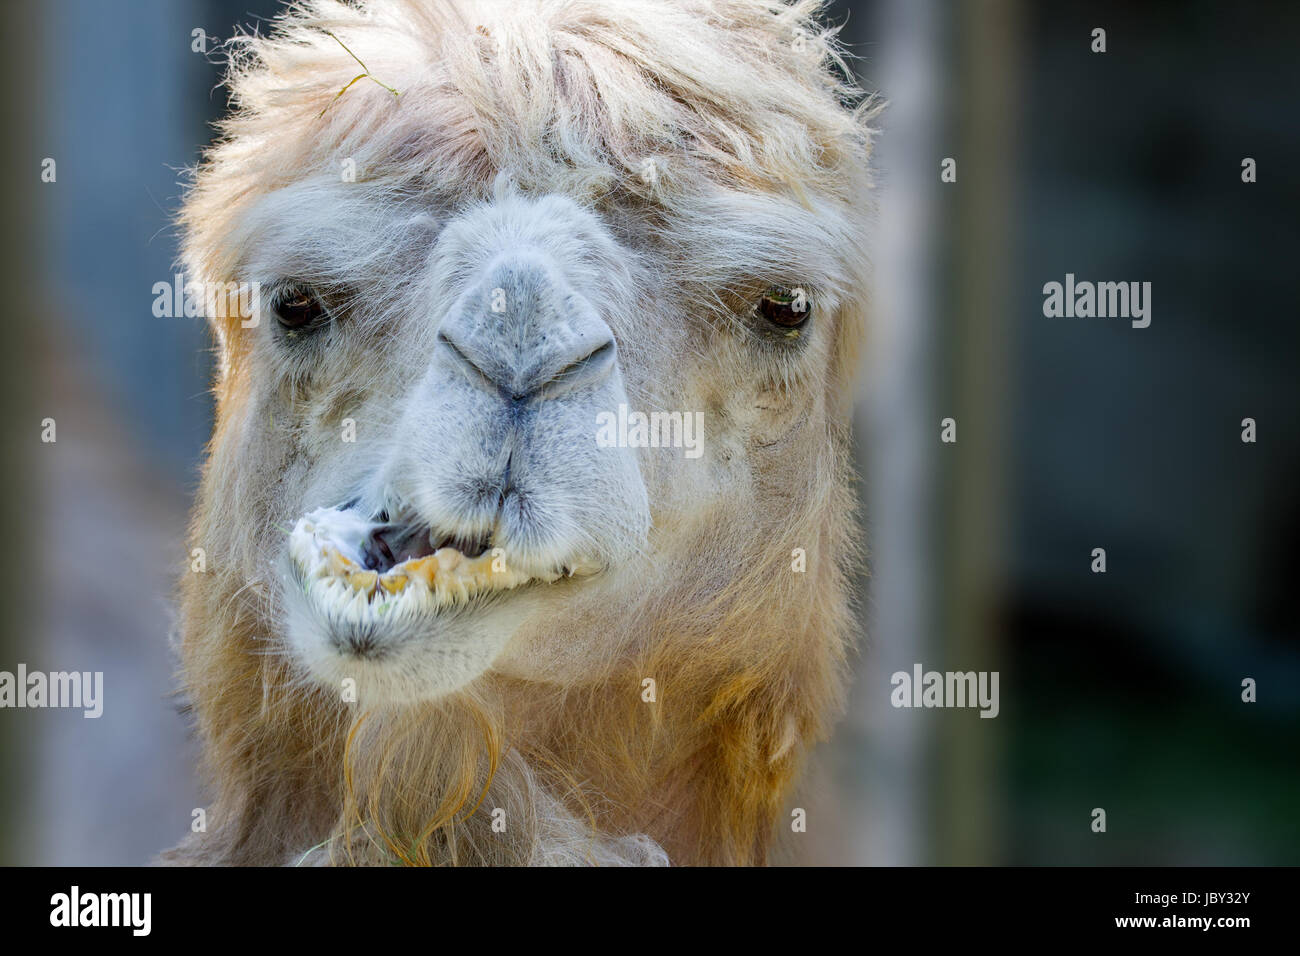 Image of an animal's head of a camel that chews Stock Photo